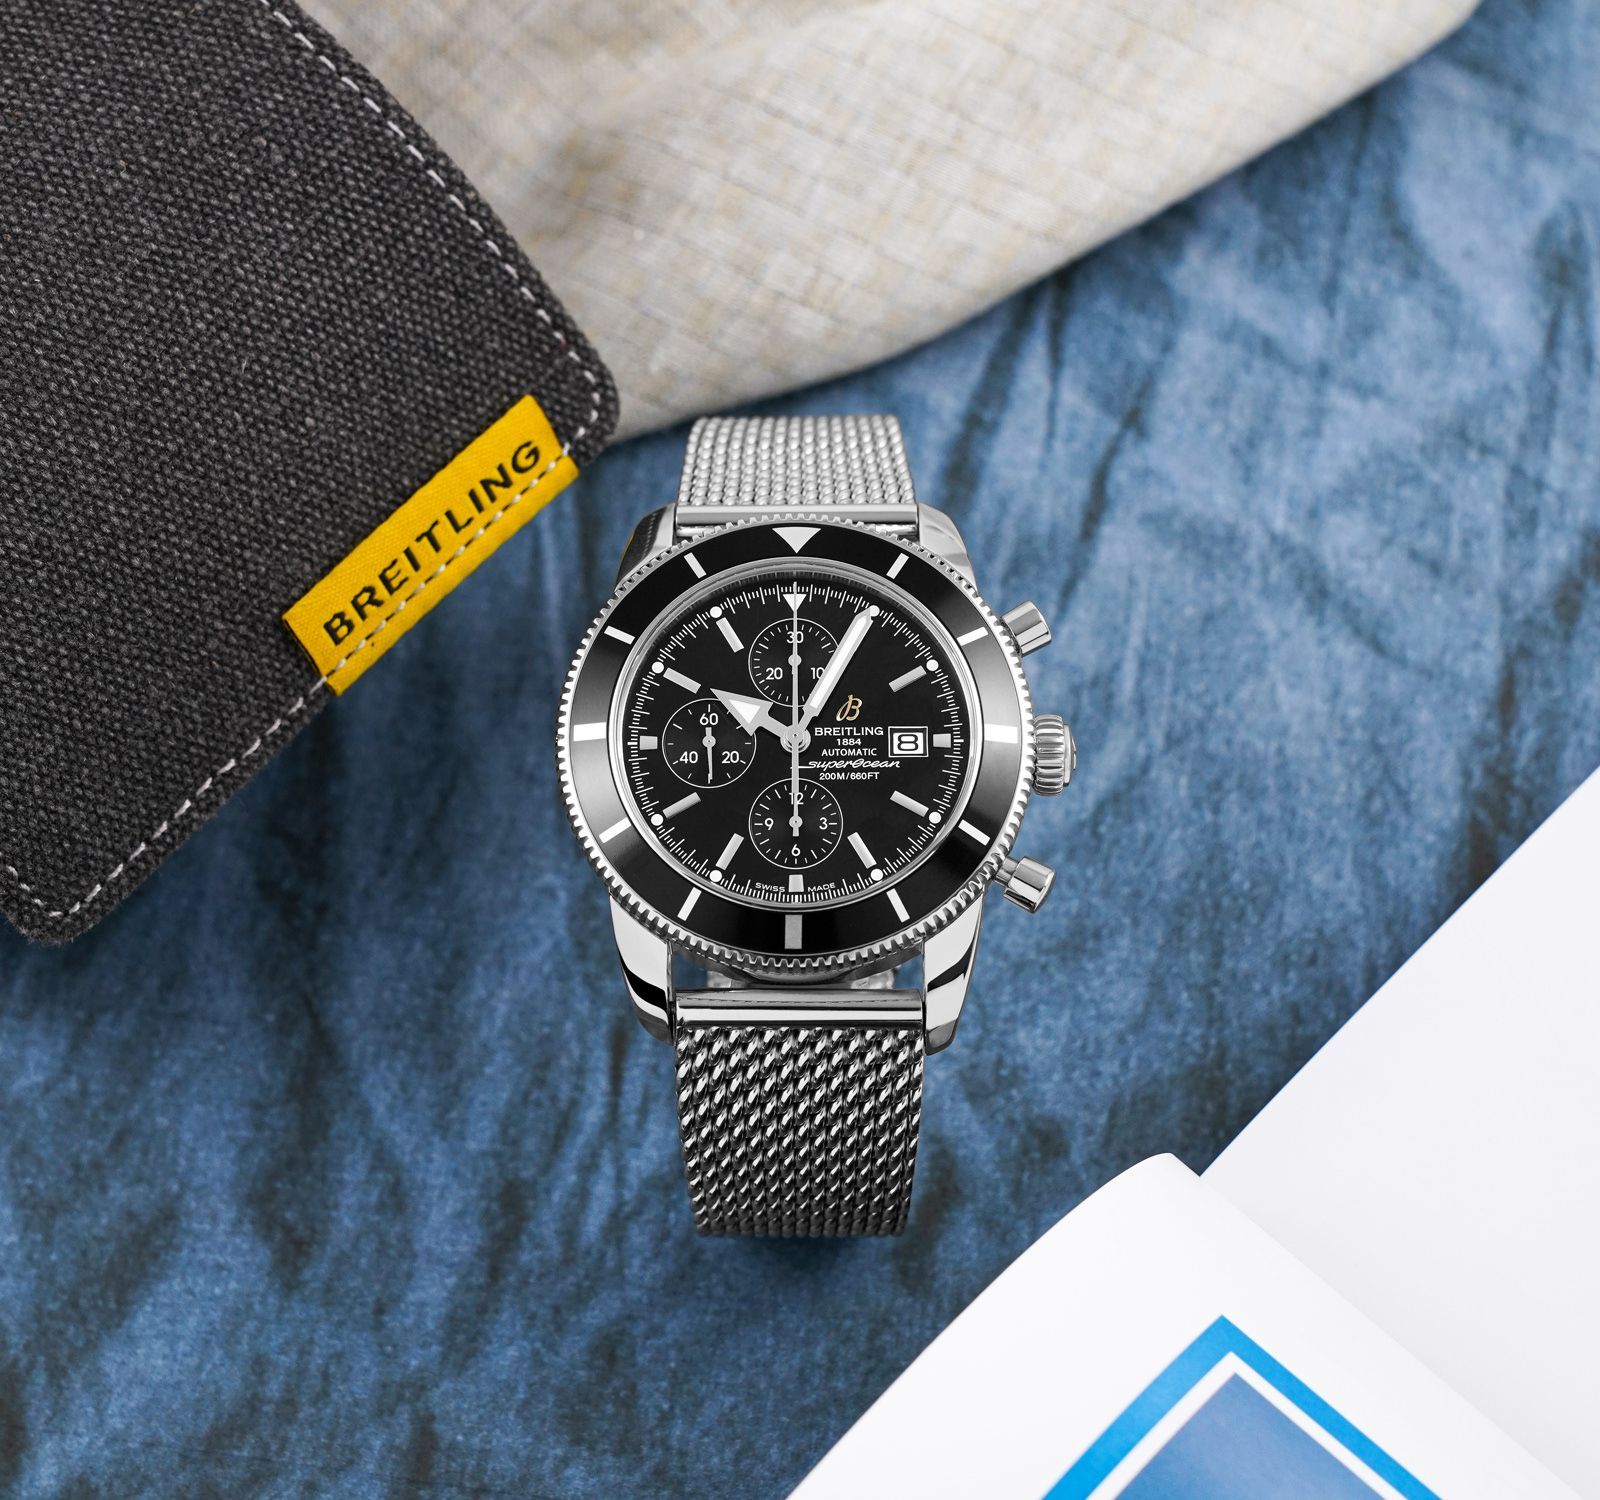 Breitling Pre-owned Breitling Superocean Heritage Chronographe 46  Chronograph Automatic Black Dial Men's Watch A1332024-B908-152A  845960007269 - Pre-Owned Watches - Jomashop